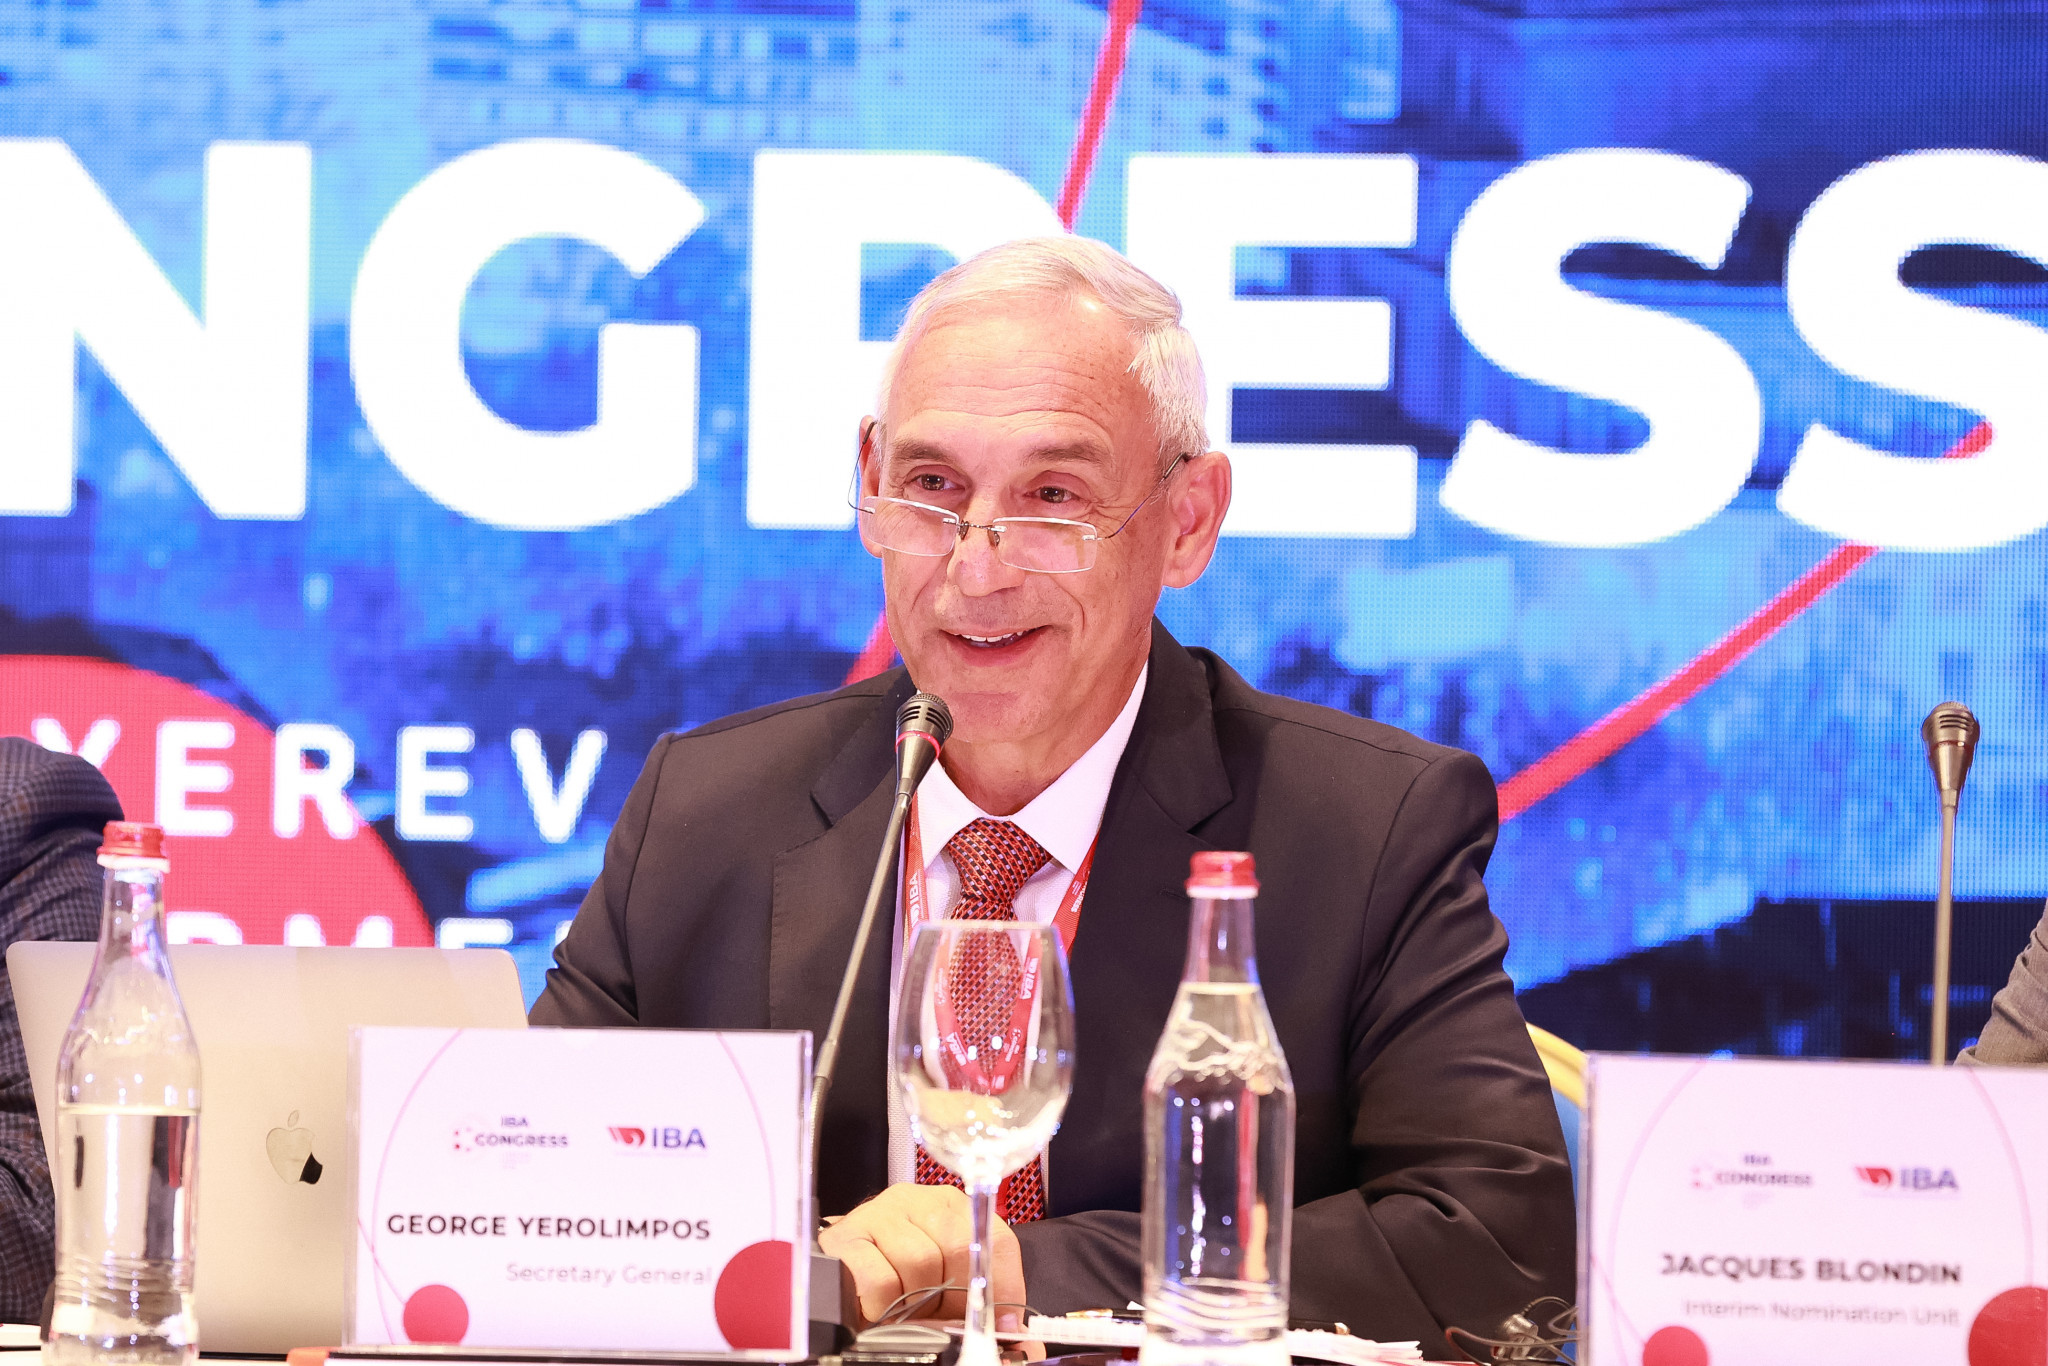 IBA secretary general George Yerolimpos addressed three areas of concern raised by the IOC in relation to the IBA Extraordinary Congress ©IBA